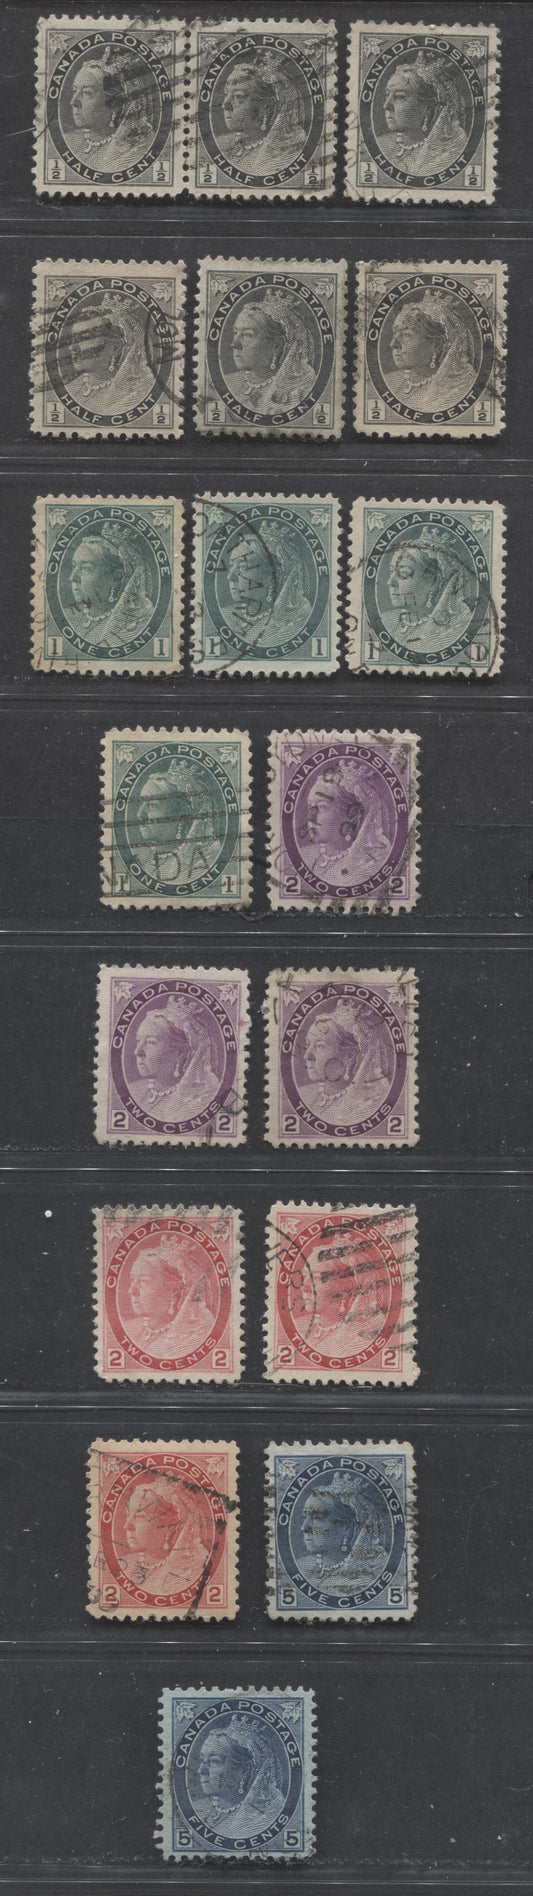 Lot 250 Canada #74, 75i, 75ii, 76, 77, 79, 79b 1/2c, 1c, 2c, 5c Black - Blue On Bluish Queen Victoria, 1898-1902 Numeral Issue, 18 VF Used Singles & 1 Pair, All With Different Papers or Shades